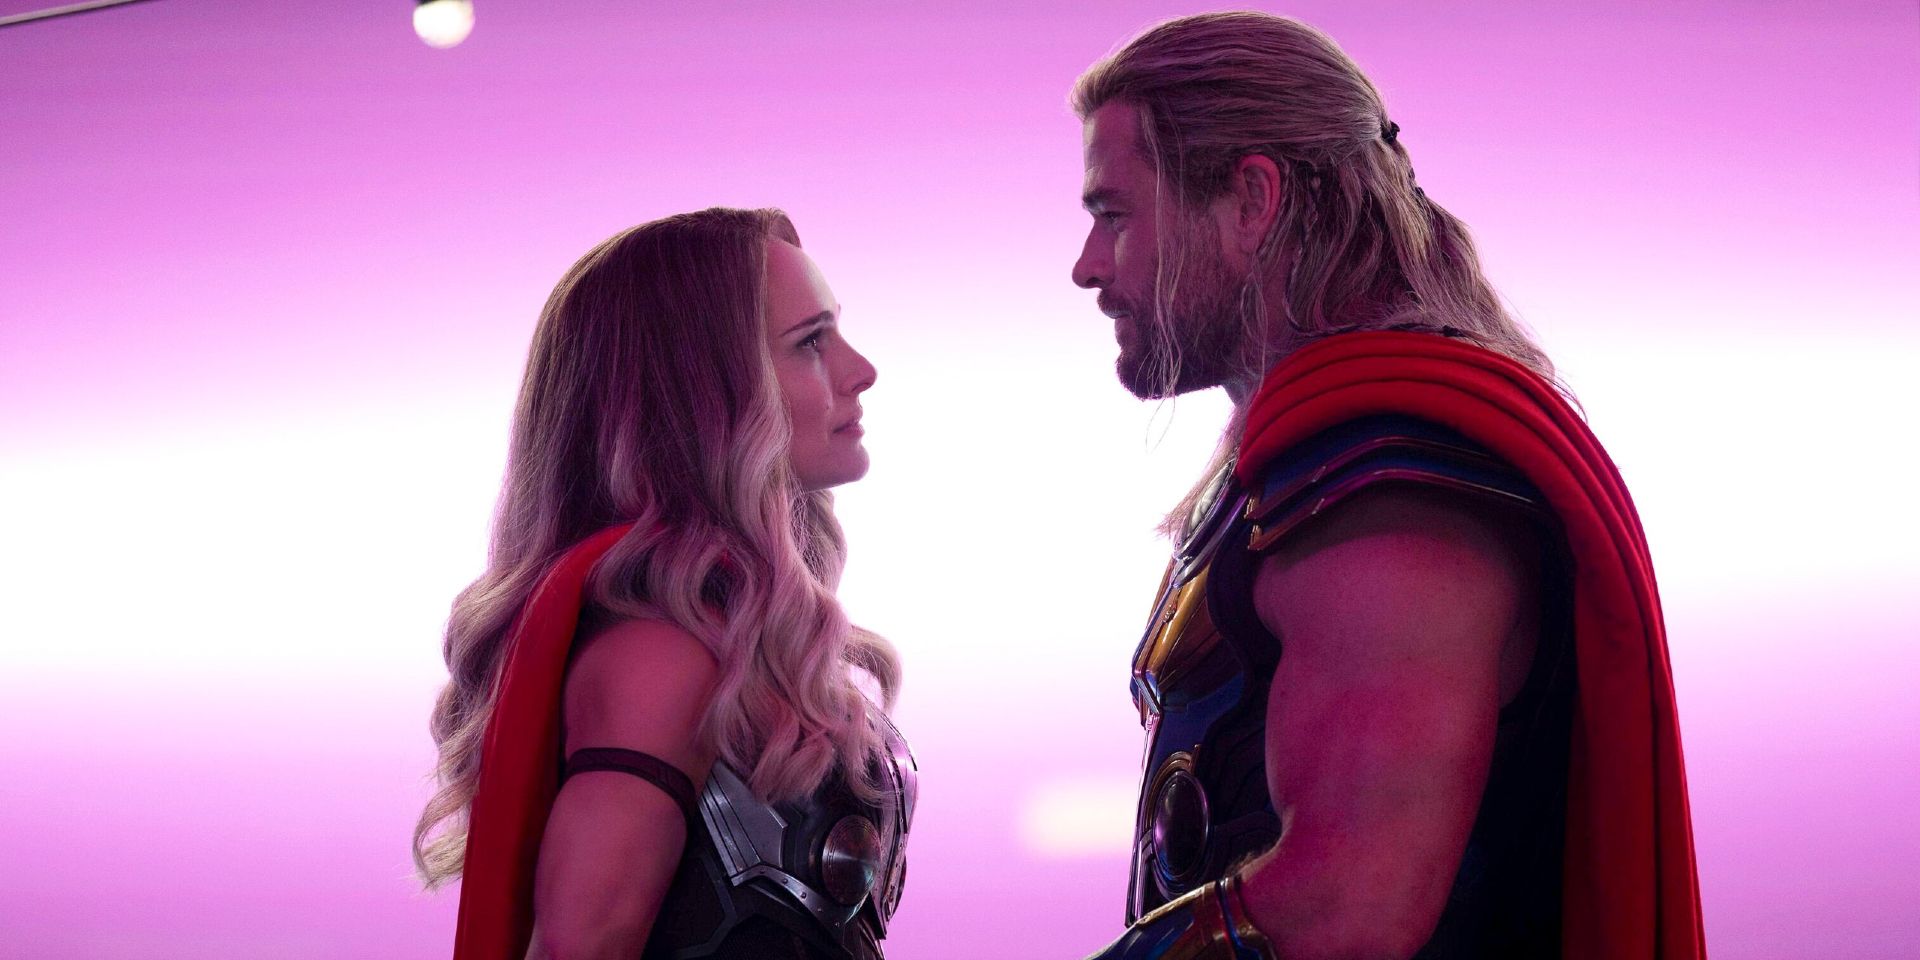 Jane Foster as Mighty Thor shares an intimate moment with Thor in the MCU's Thor: Love & Thunder